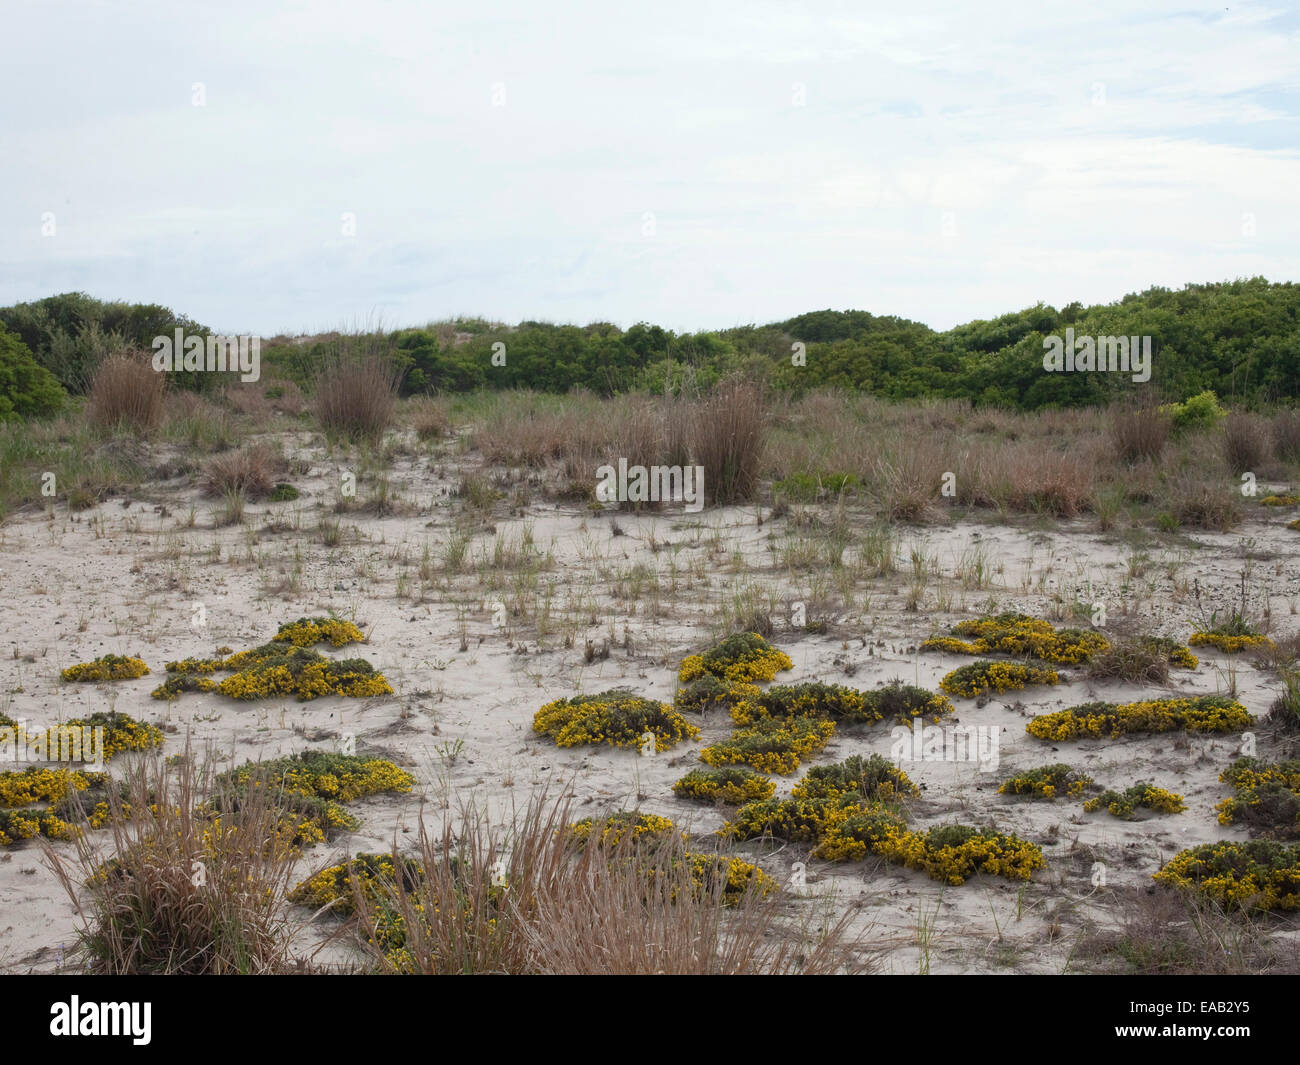 Beach dunes and Golden flora in Spring Stock Photo